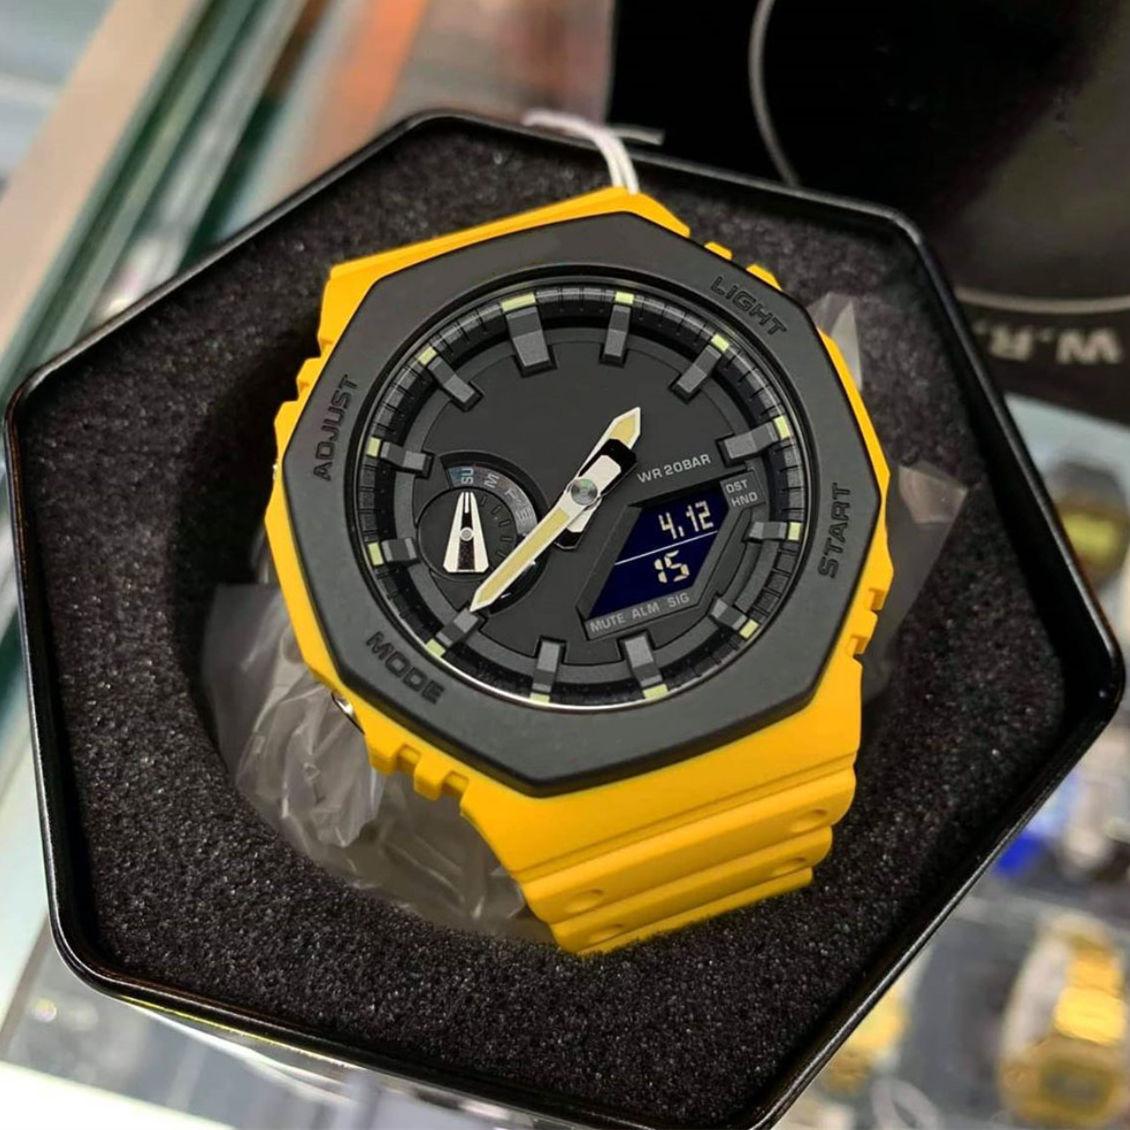 

Men's sports digital 2100 quartz watch LED cold light dual display all hands can be operated, waterproof and shockproof